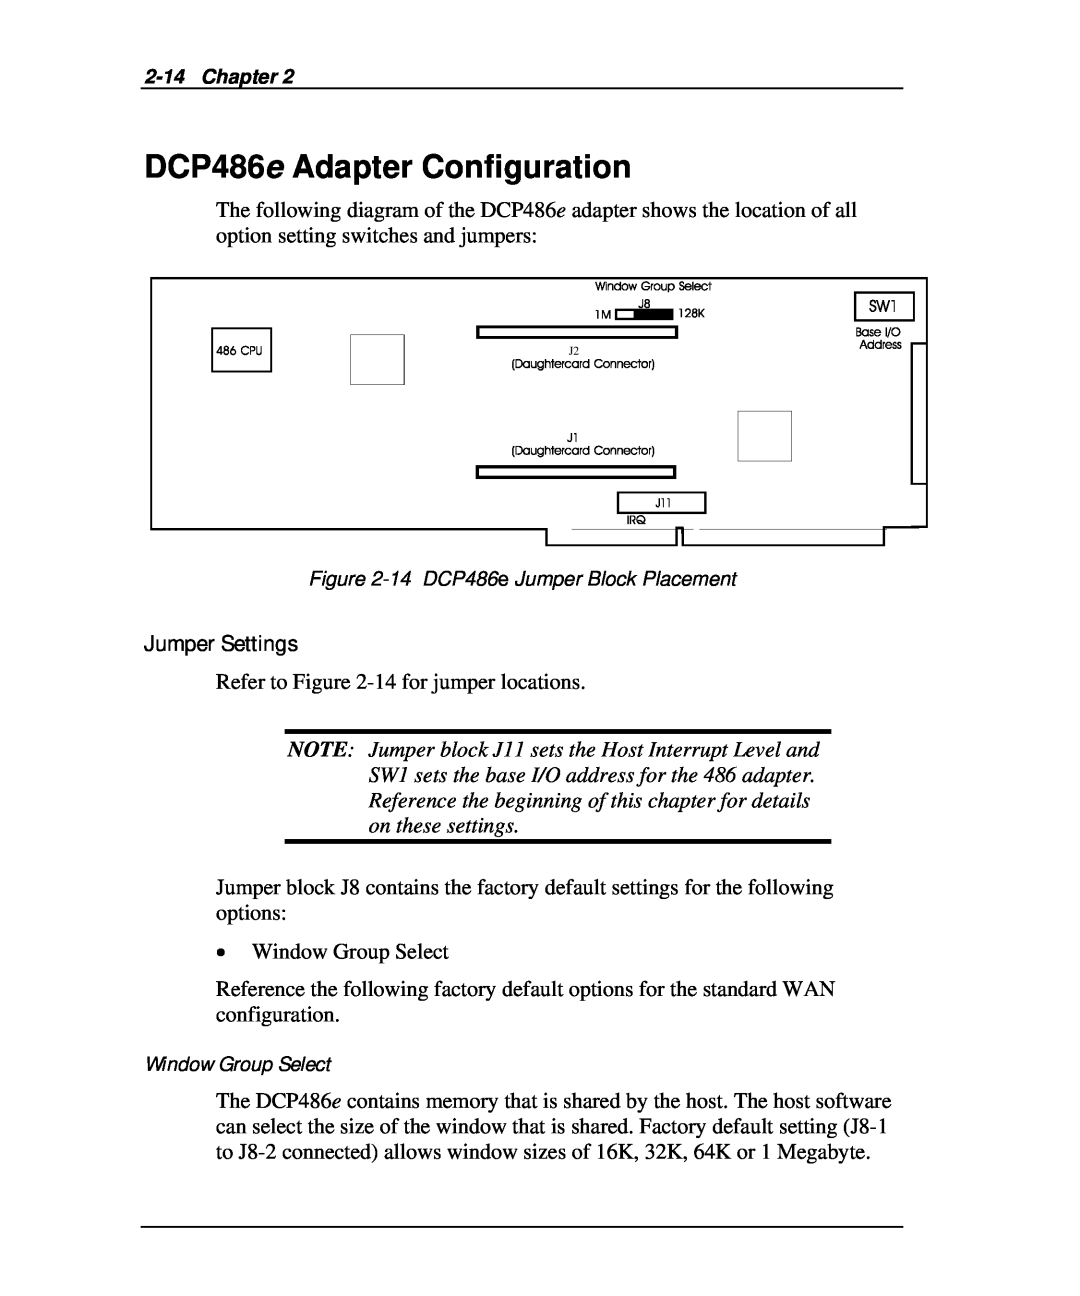 Emulex DCP_link manual DCP486e Adapter Configuration, Jumper Settings, Window Group Select, Chapter 